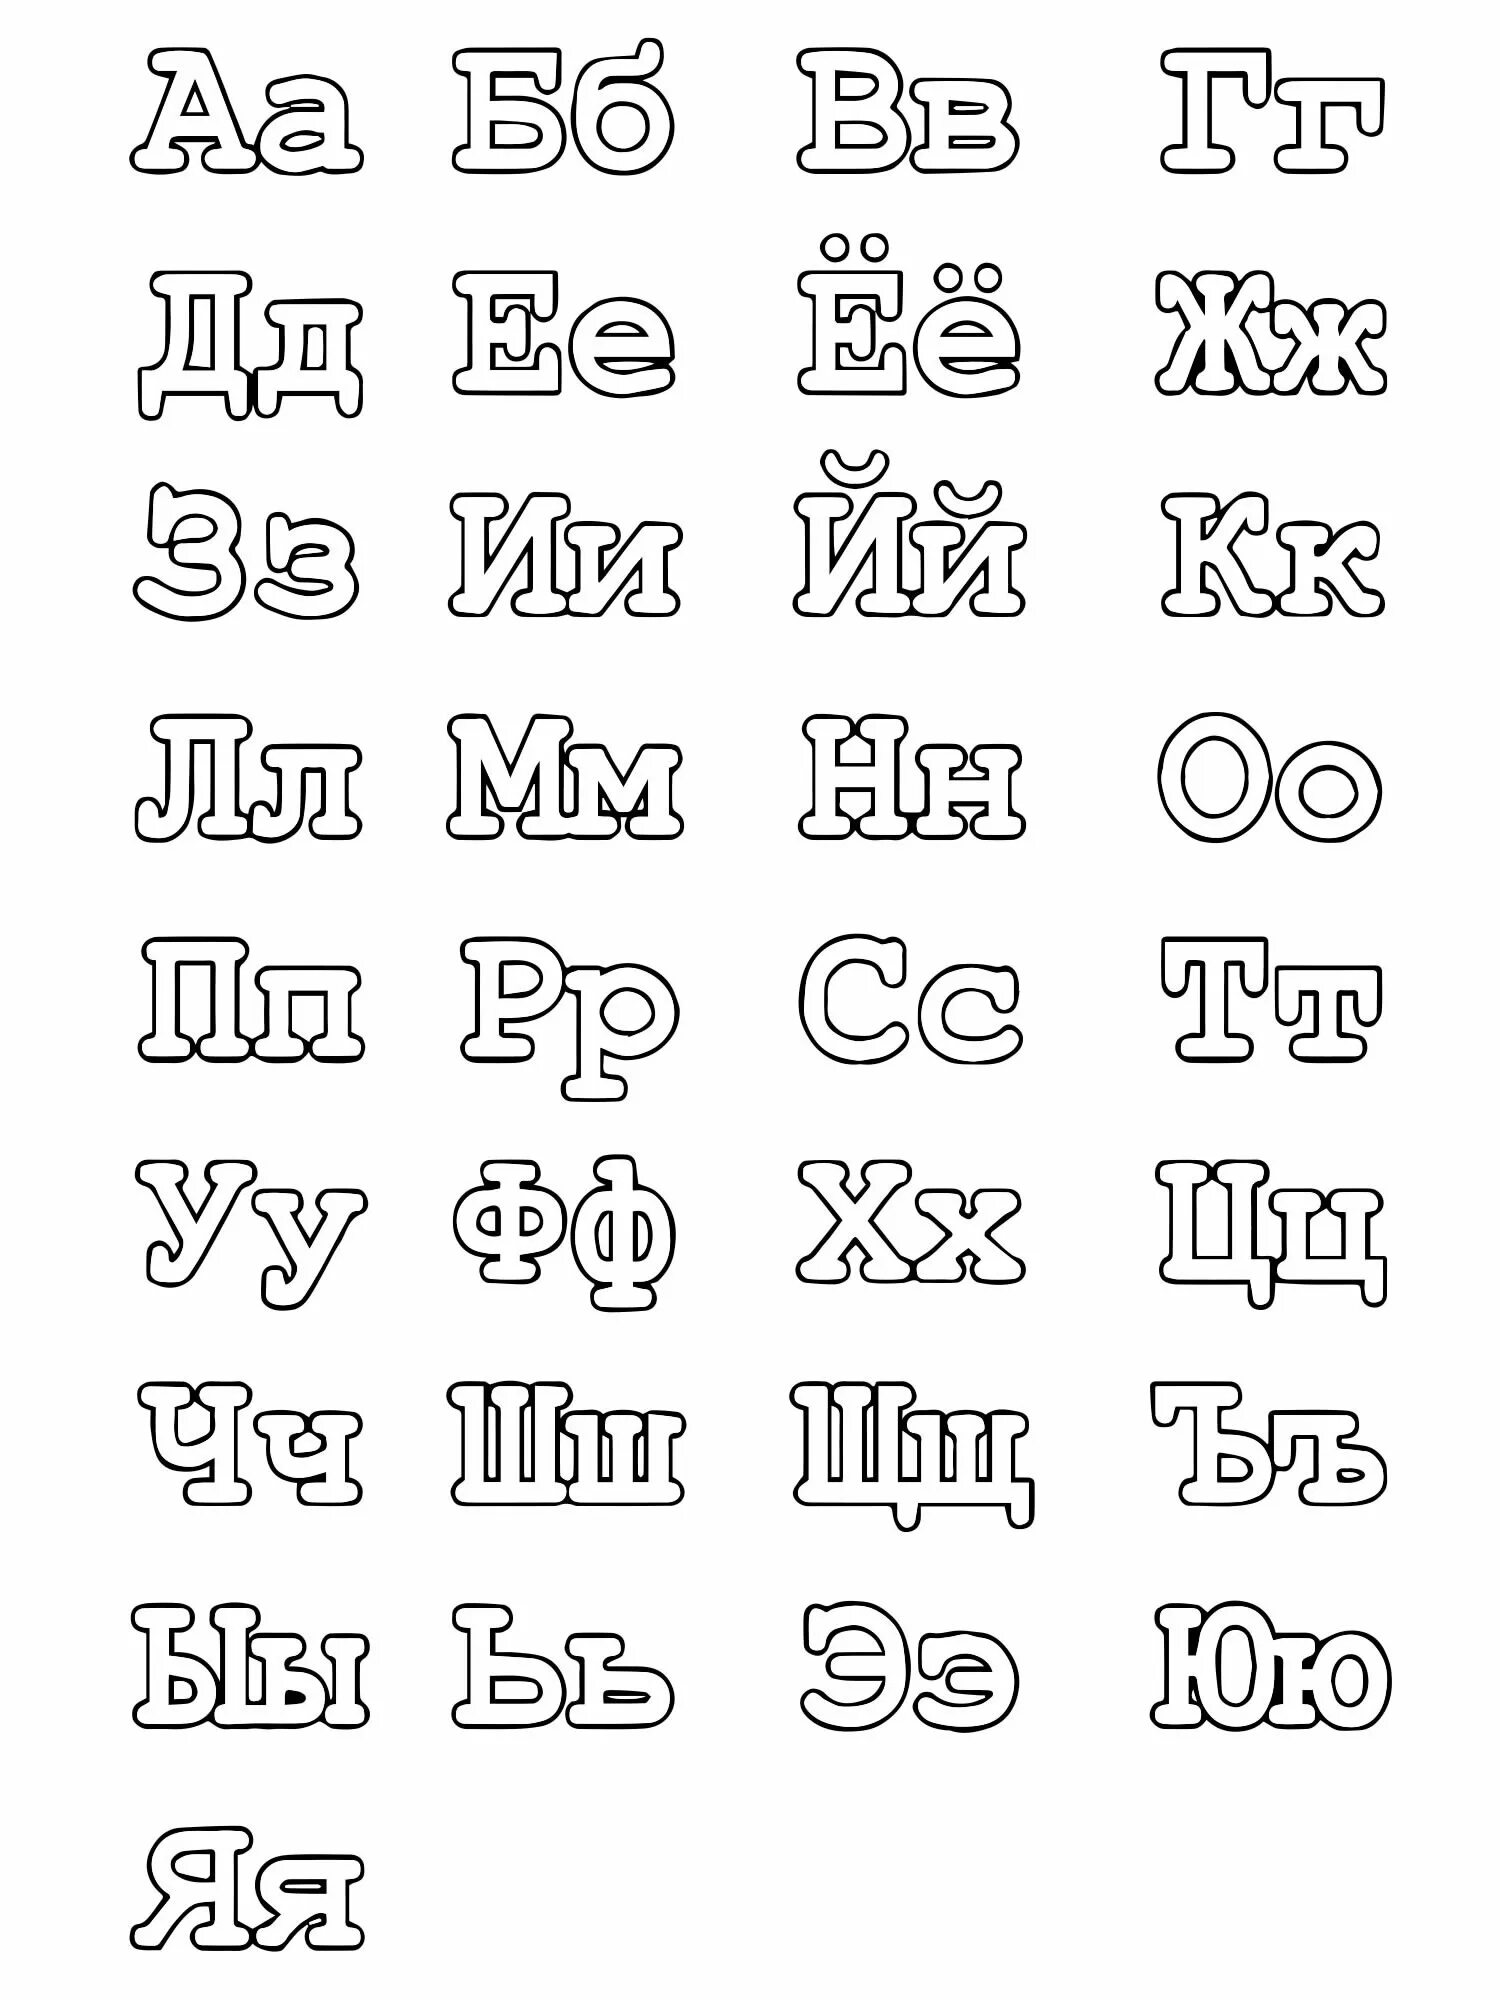 Russian printed alphabet all 33 letters #13